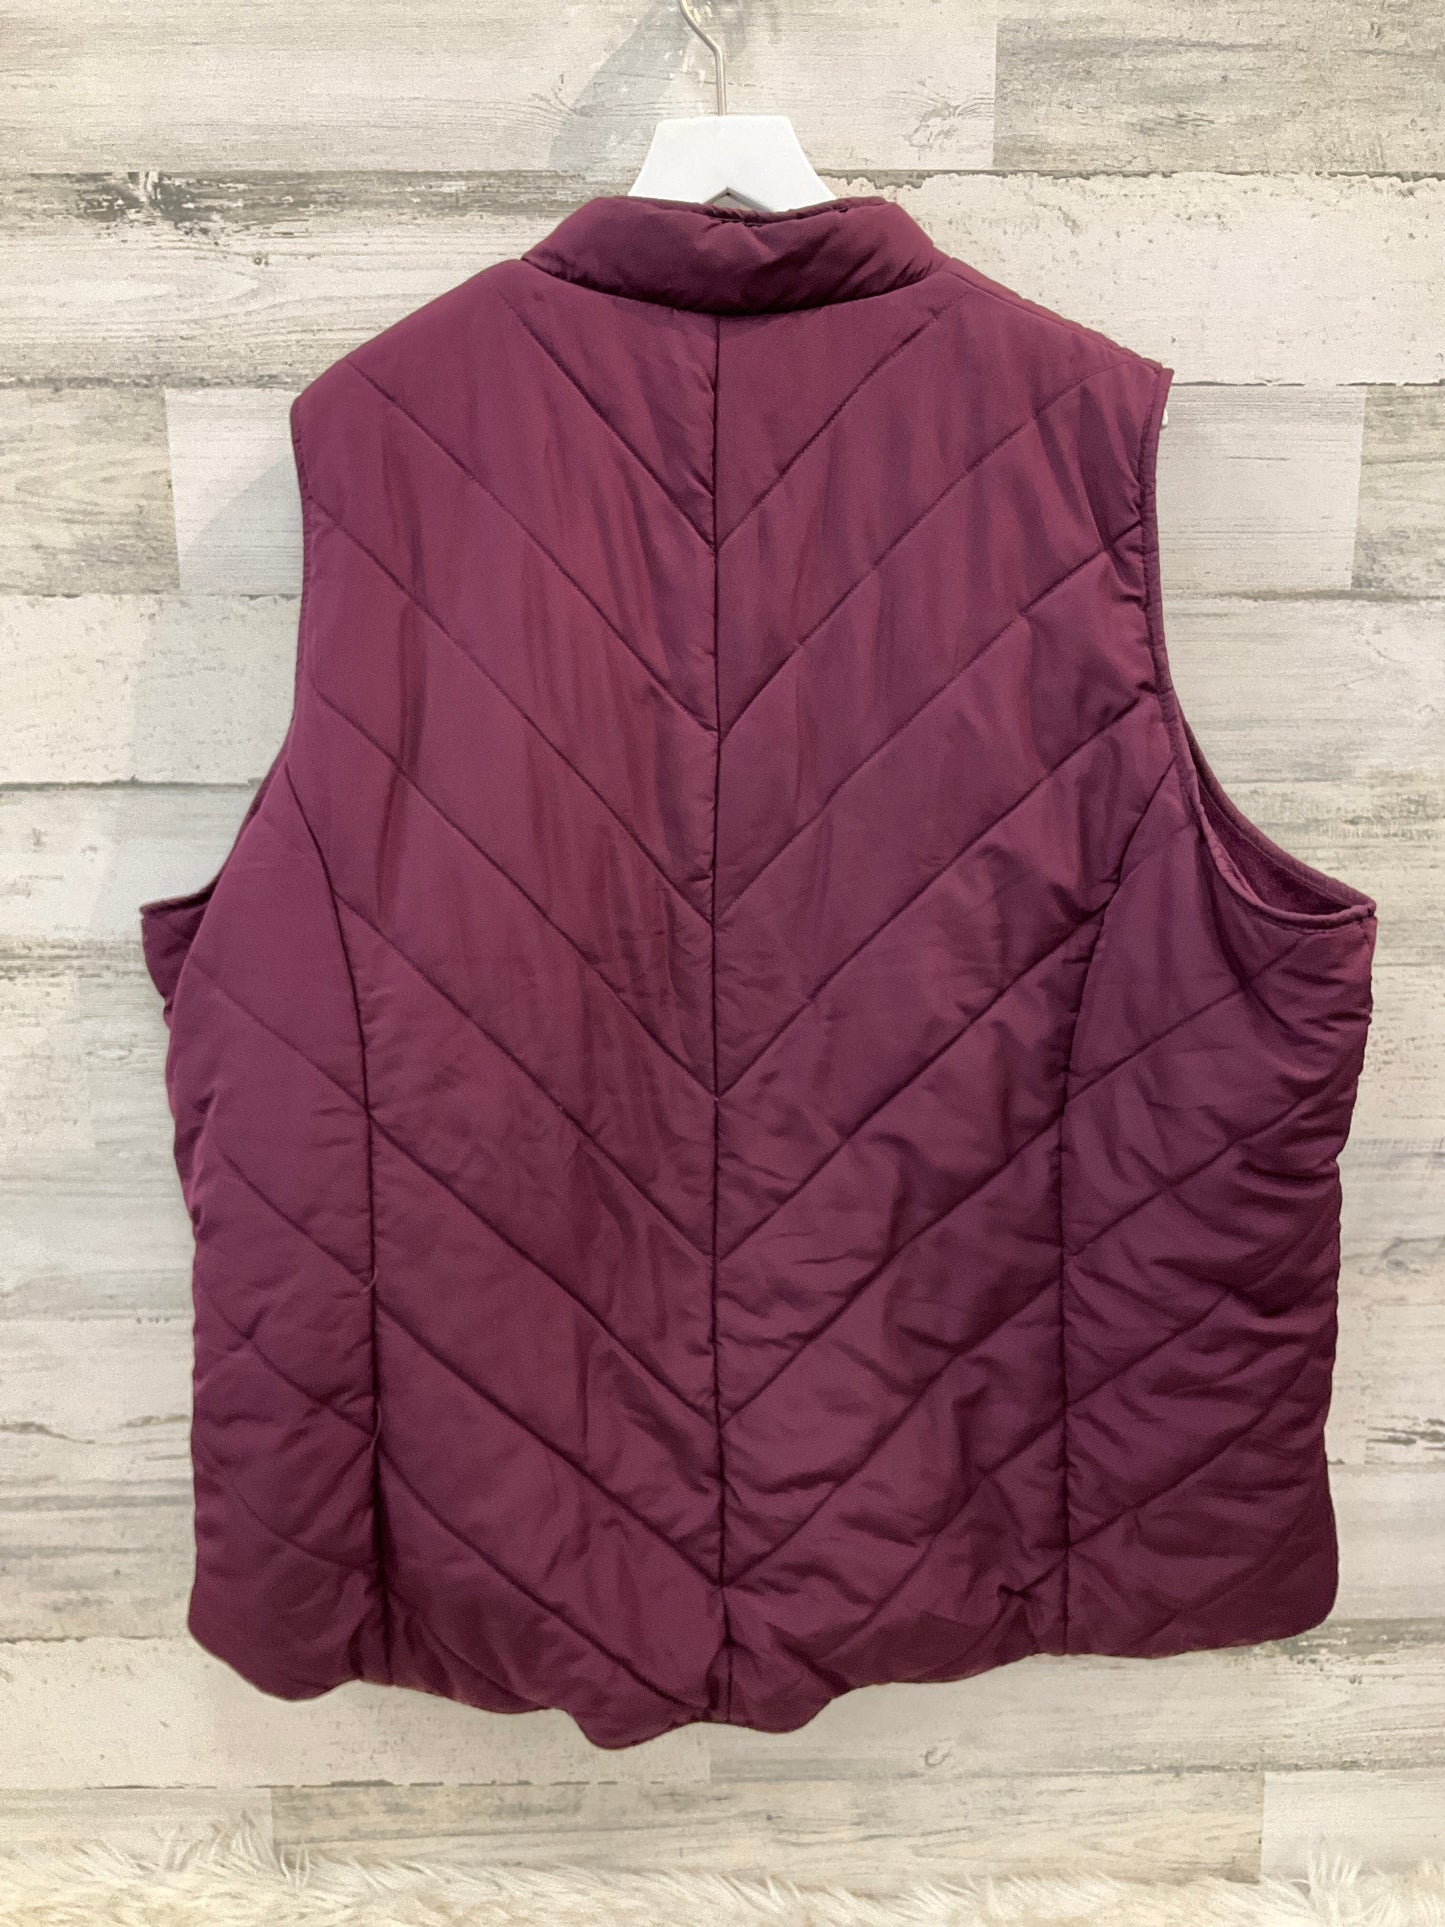 Vest Puffer & Quilted By Lane Bryant  Size: 4x